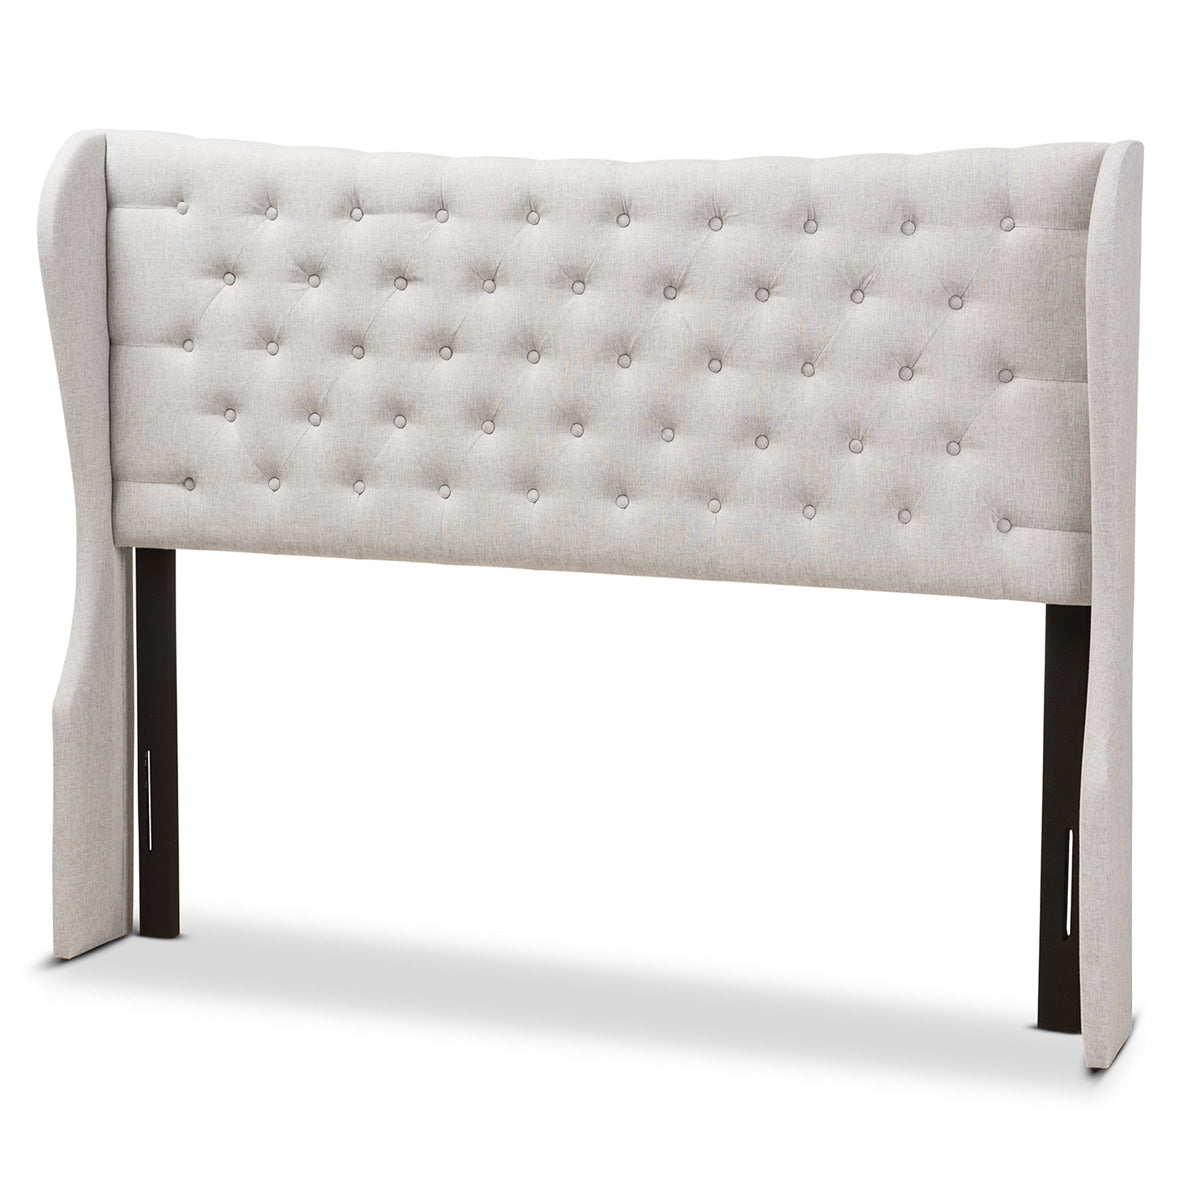 Baxton Studio Cadence Modern and Contemporary Greyish Beige Fabric Button-Tufted Queen Size Winged Headboard Baxton Studio-Headboards-Minimal And Modern - 1